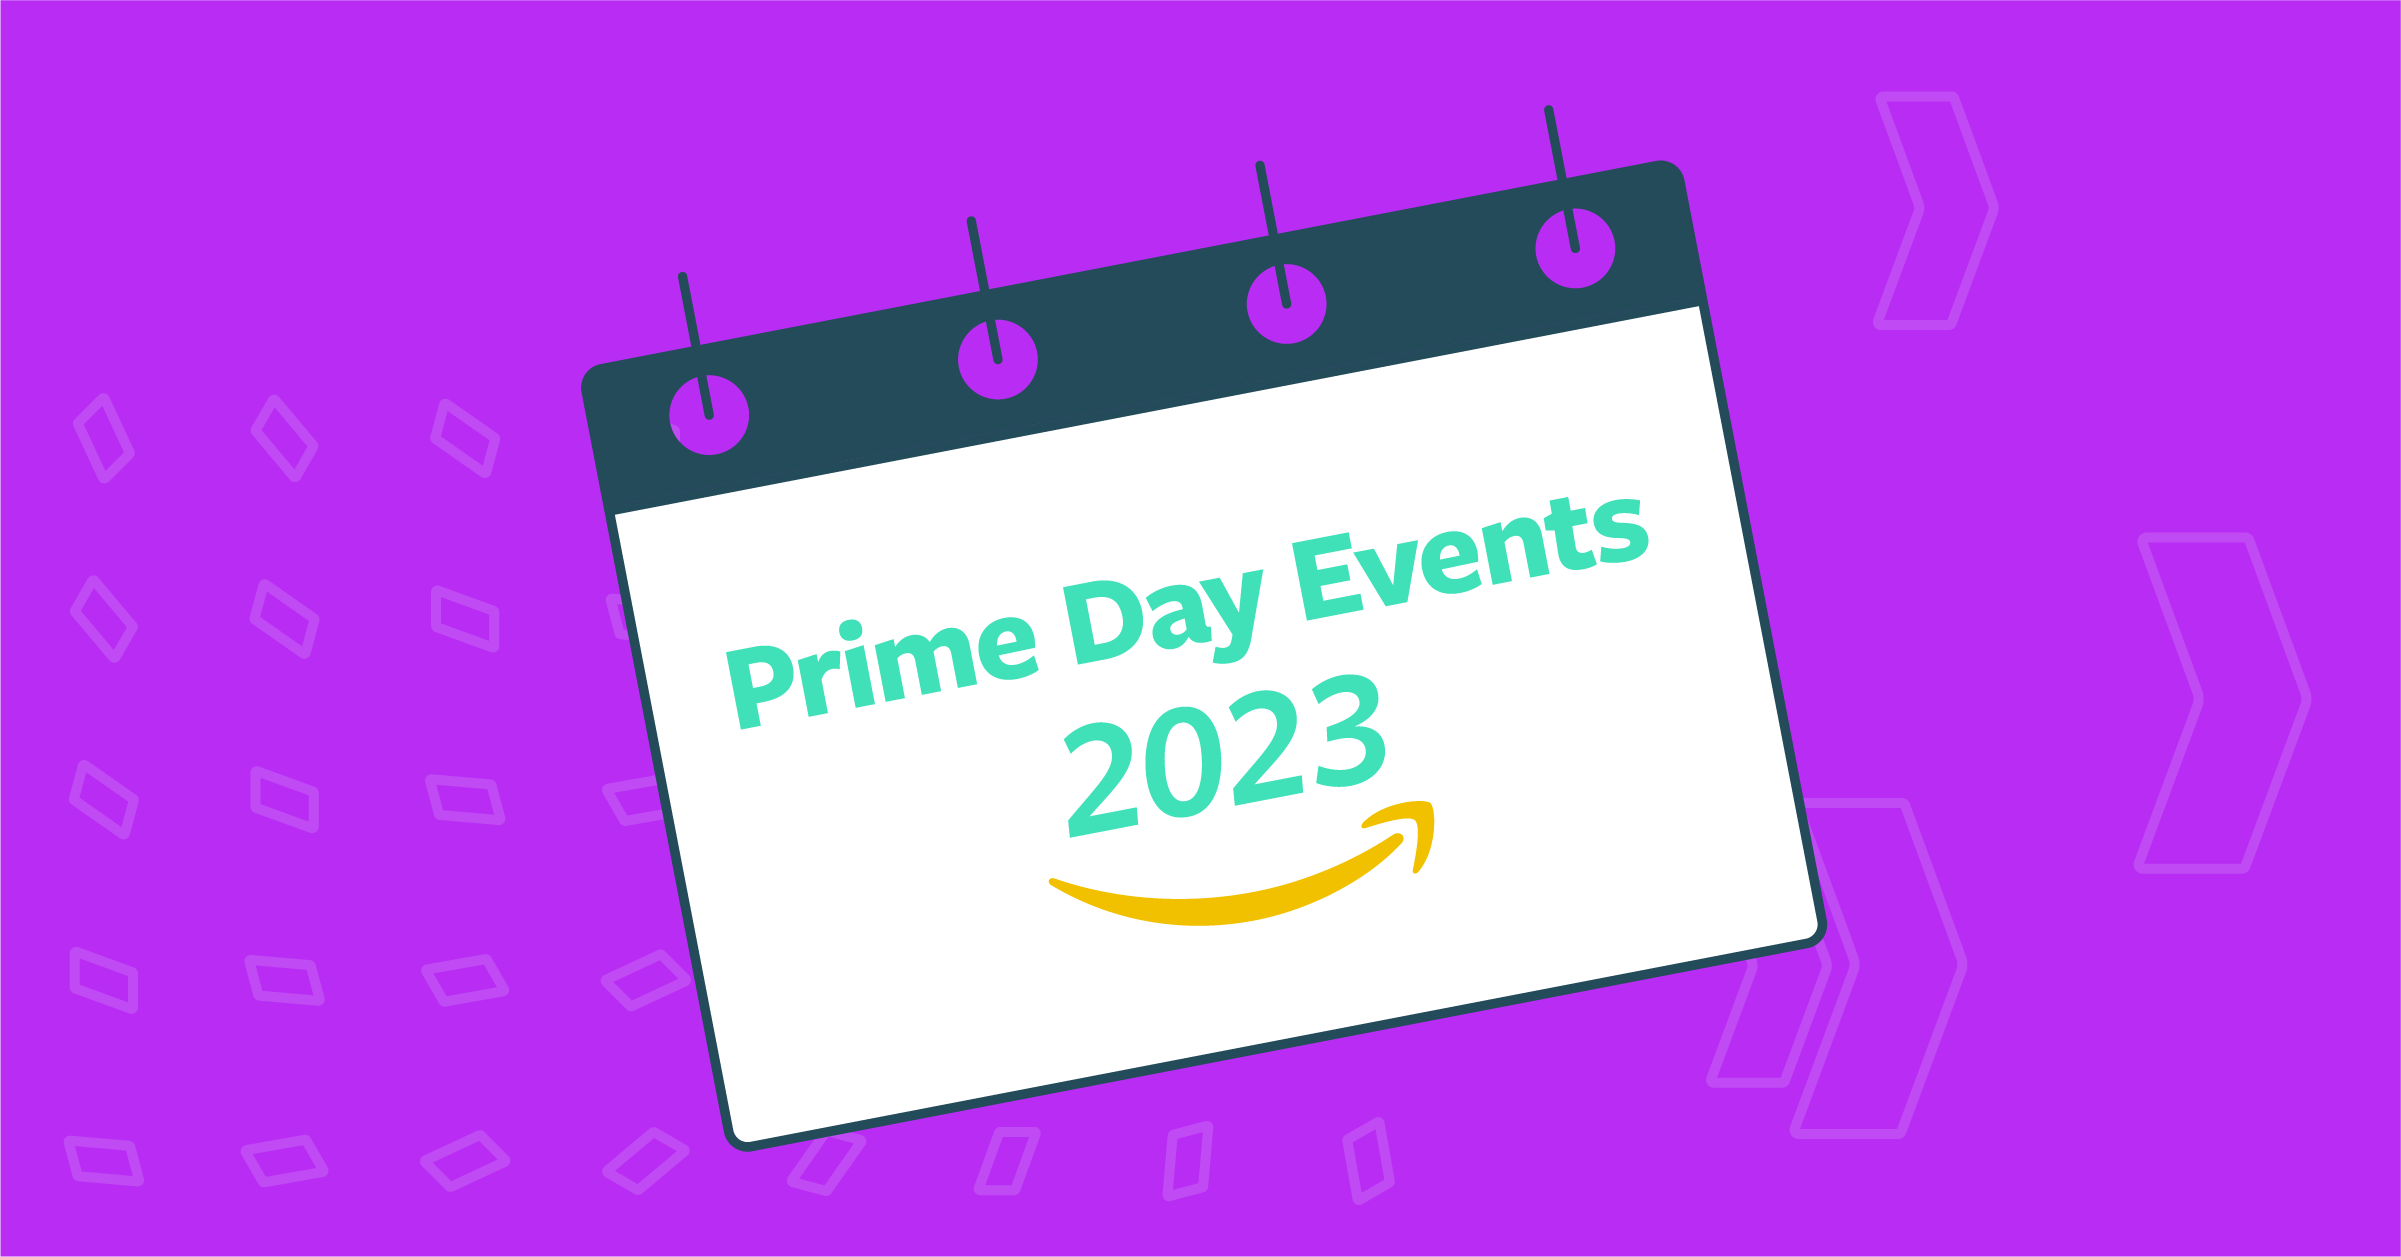 [Checklist] 2023 Prime Day Events: Dates, Deadlines, Tips